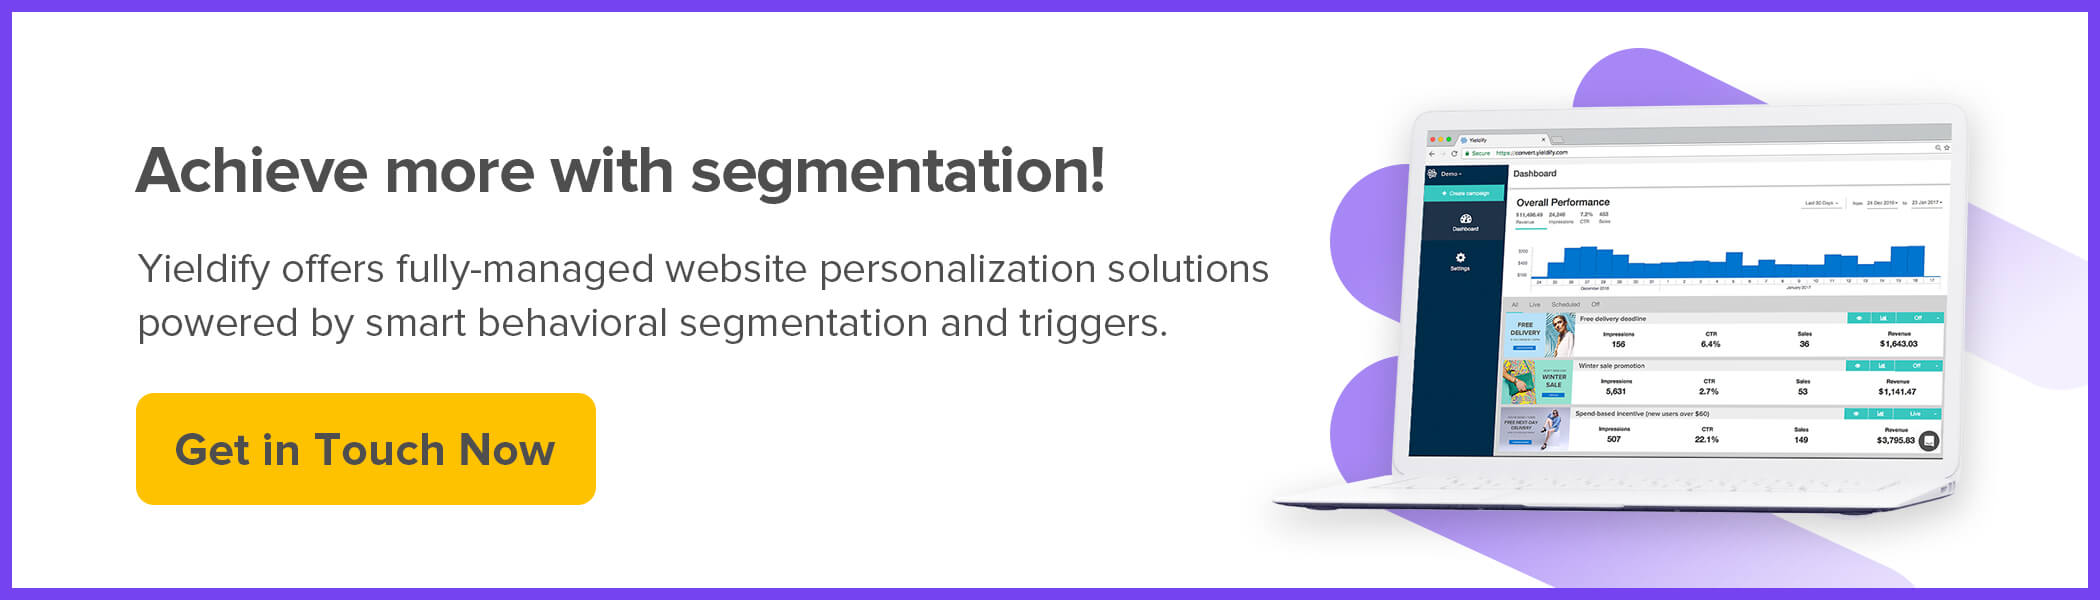 Audience segmentation for eCommerce - Book a Yieldify demo now!